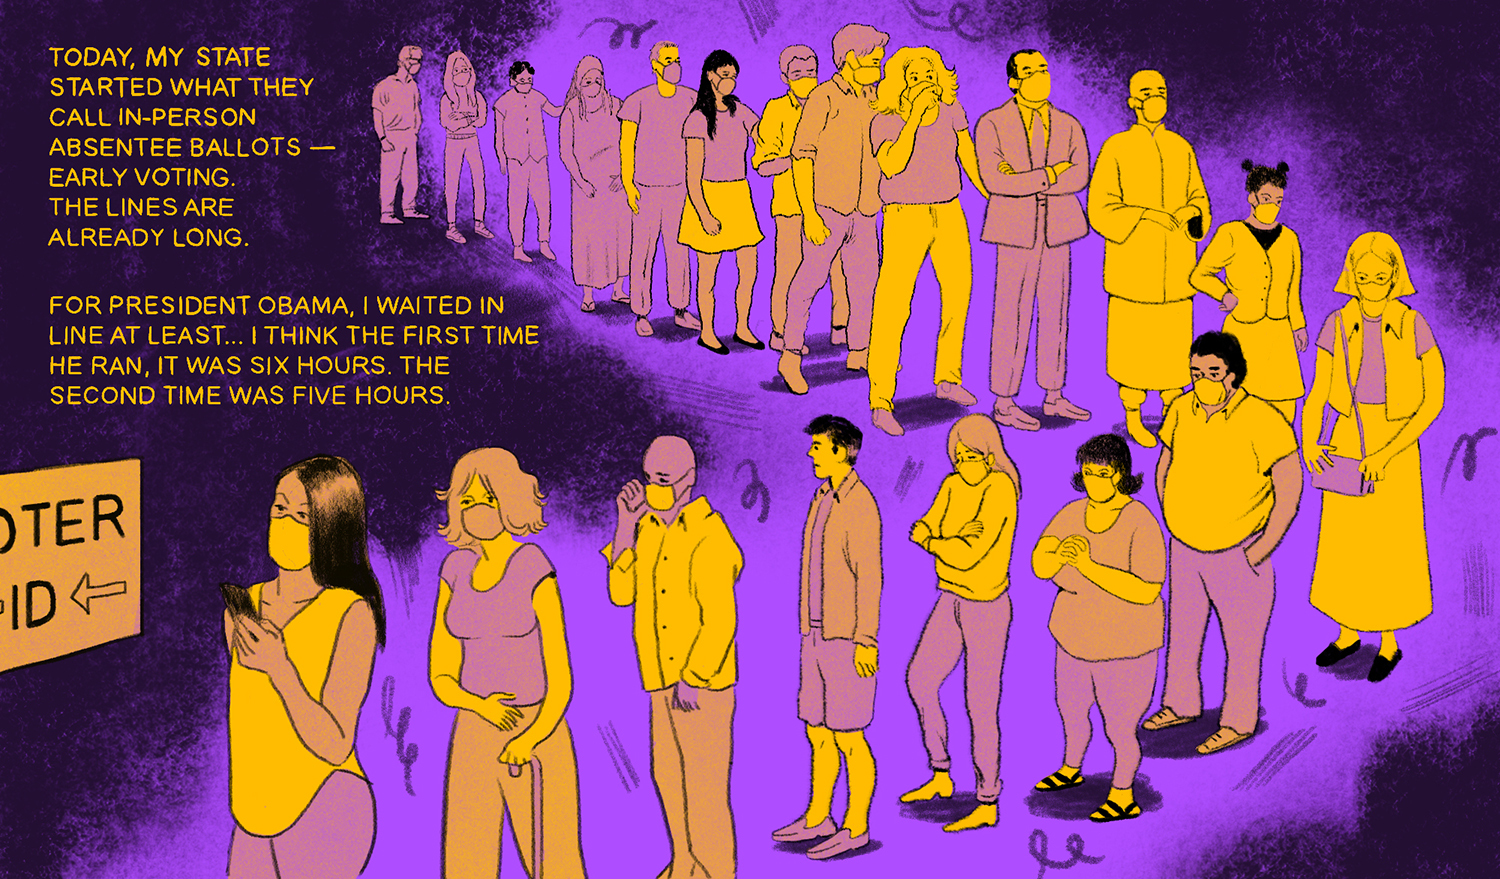 Illustration of people wearing masks in line to vote. The text on the image reads "Today, my state started what they call in-person absentee ballots — early voting. The lines are already long. For President Obama, I waitined in line at least ... I think the first time he ran, it was six hours. The second was five hours."